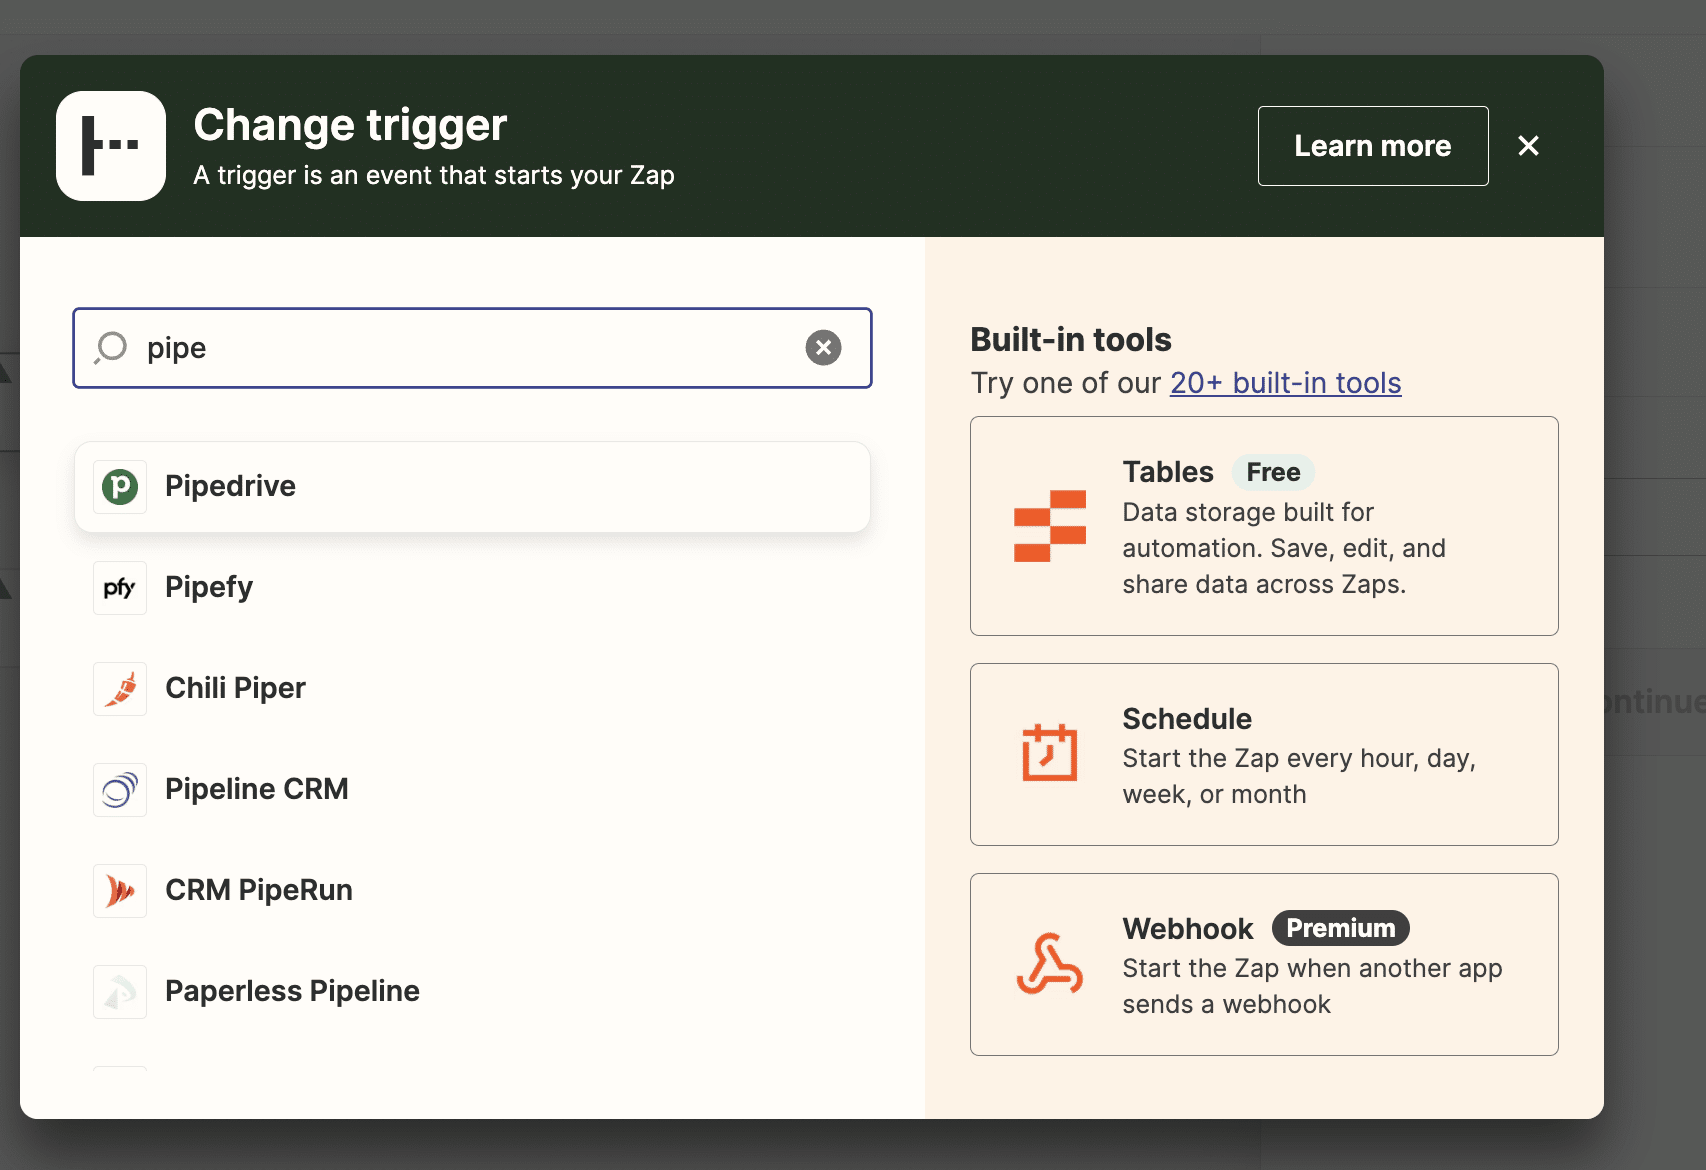 Choosing Pipedrive as the trigger application in Zap setup